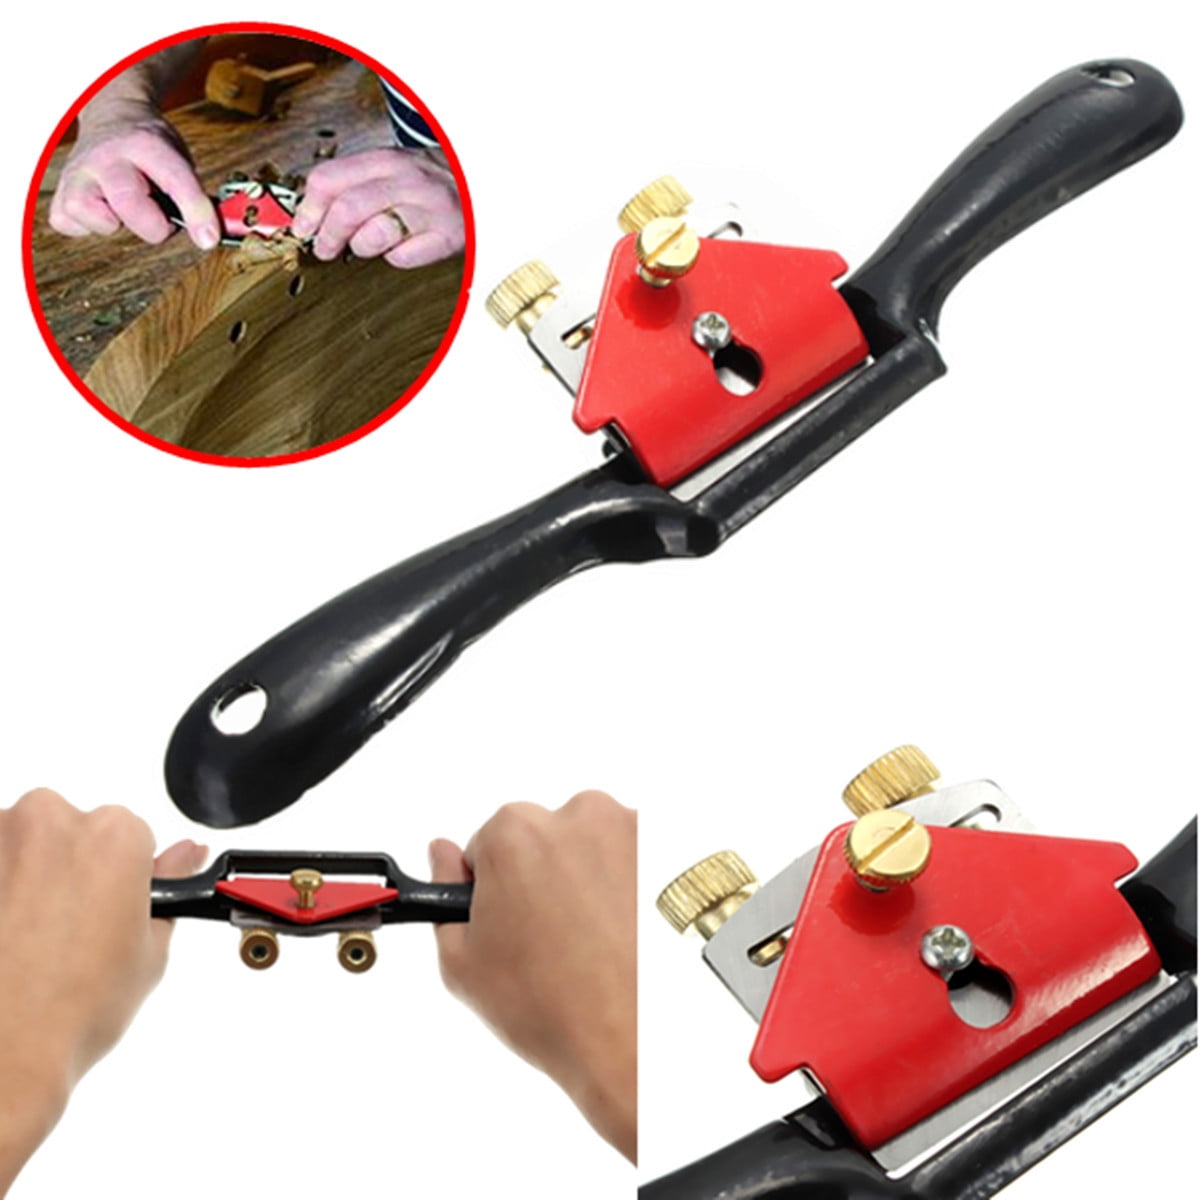 Wood Working and Hand Tool SFASTER Adjustable SpokeShave with Flat Base and Metal Blade Wood Working Wood Craft Hand Tool Wood Craver